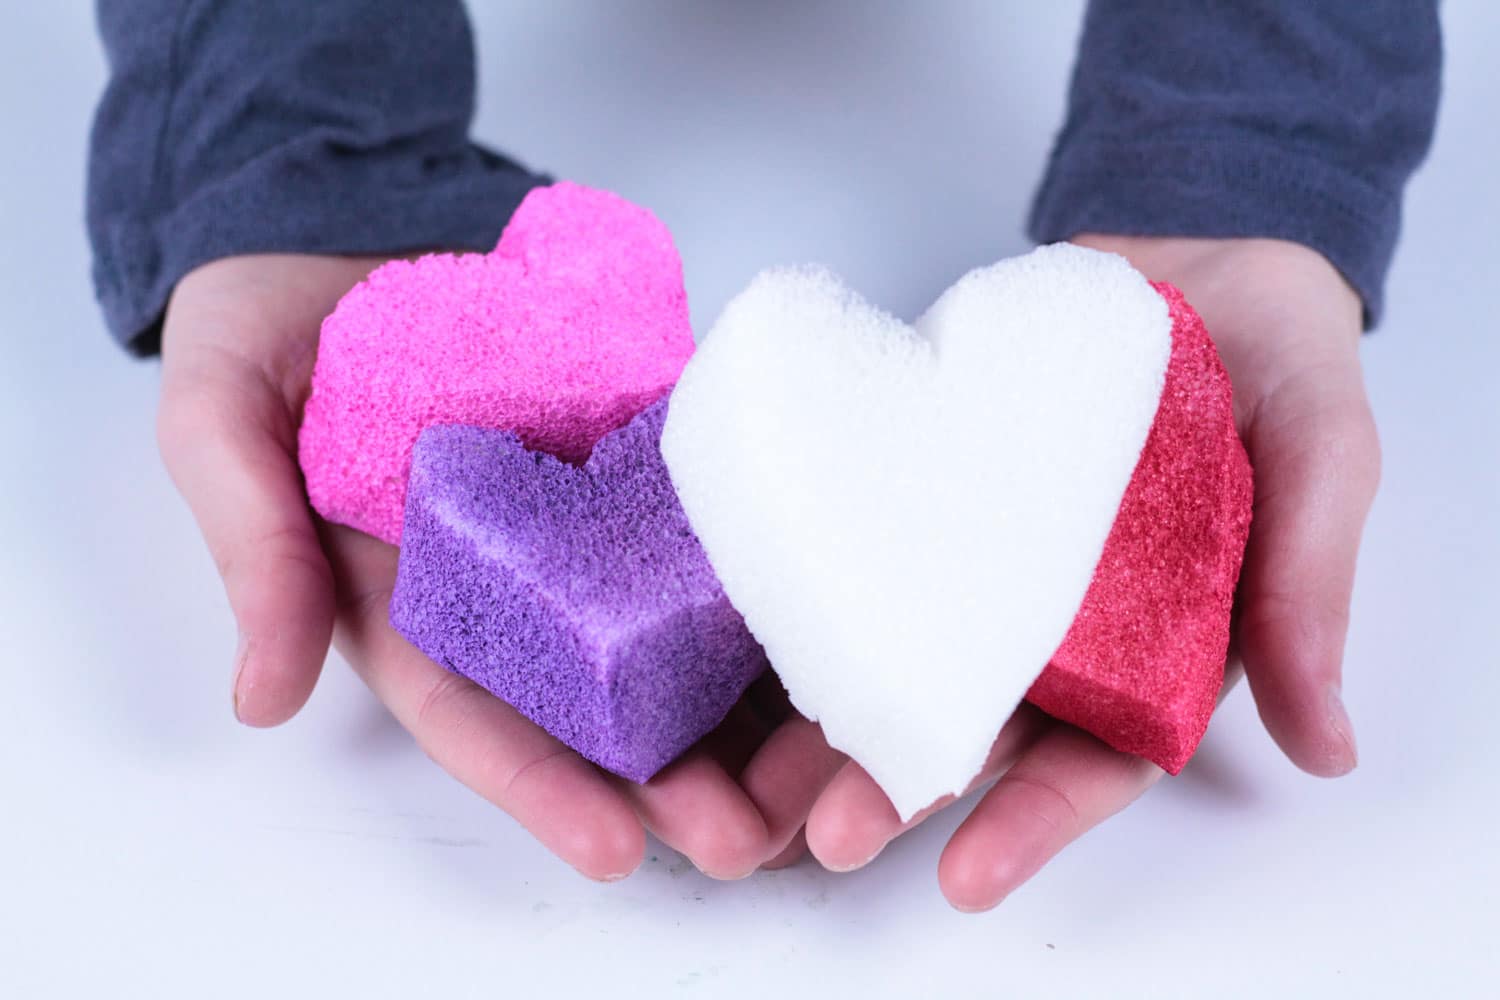 Looking for non-candy valentines? The DIY heart valentine squishy is the perfect valentine craft to make for your classmates! These DIY squishies will provide endless fun!